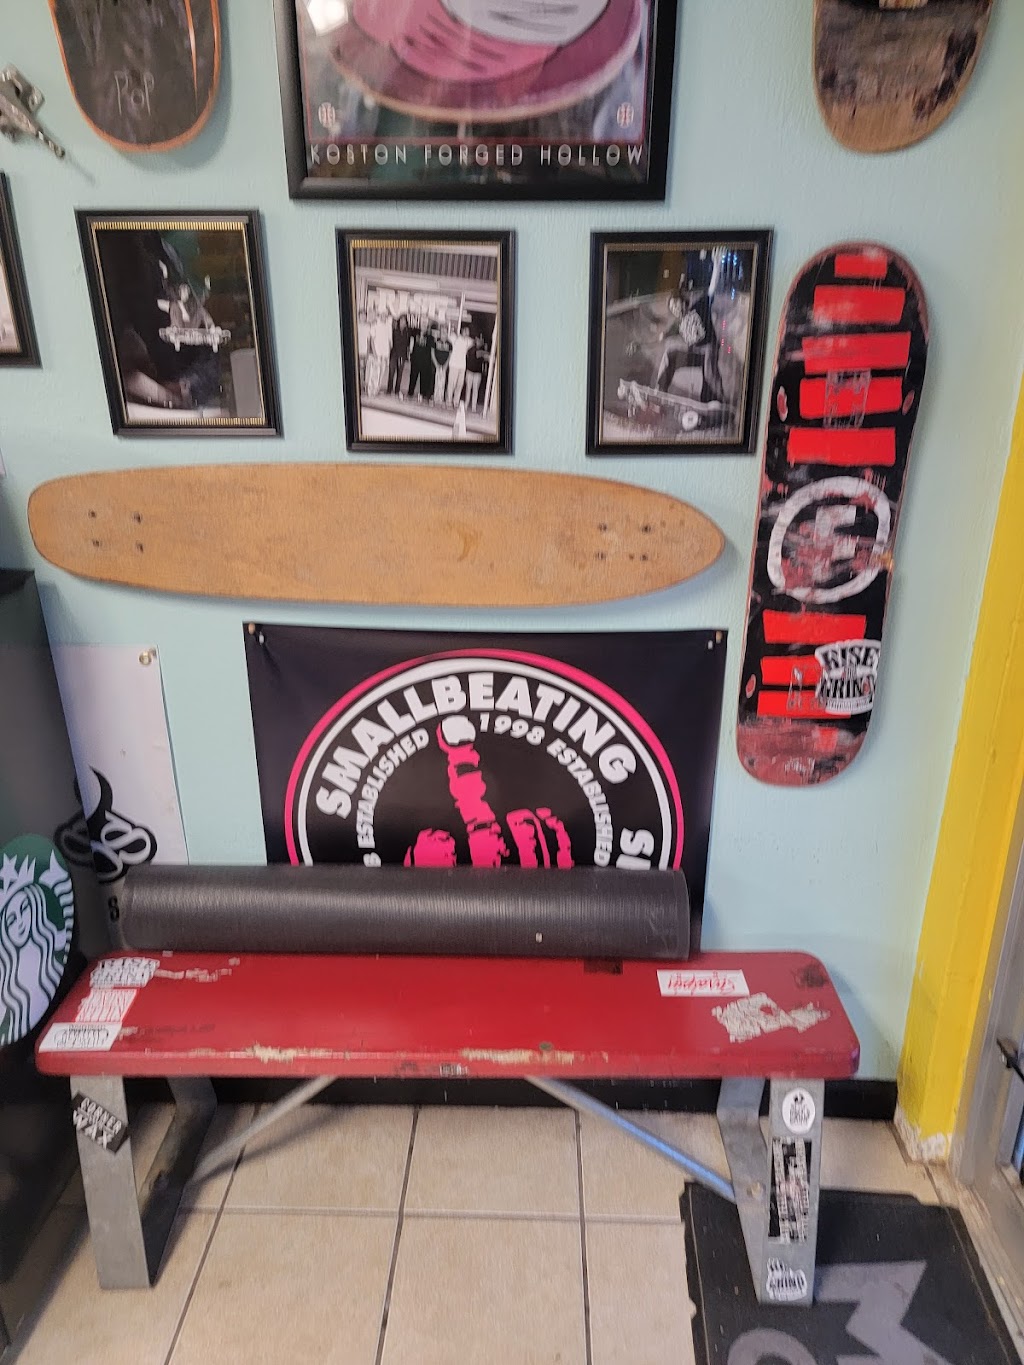 Rise And Grind Skateboard Shop | 1026 McHenry Ave #4, Modesto, CA 95350, USA | Phone: (209) 300-7664